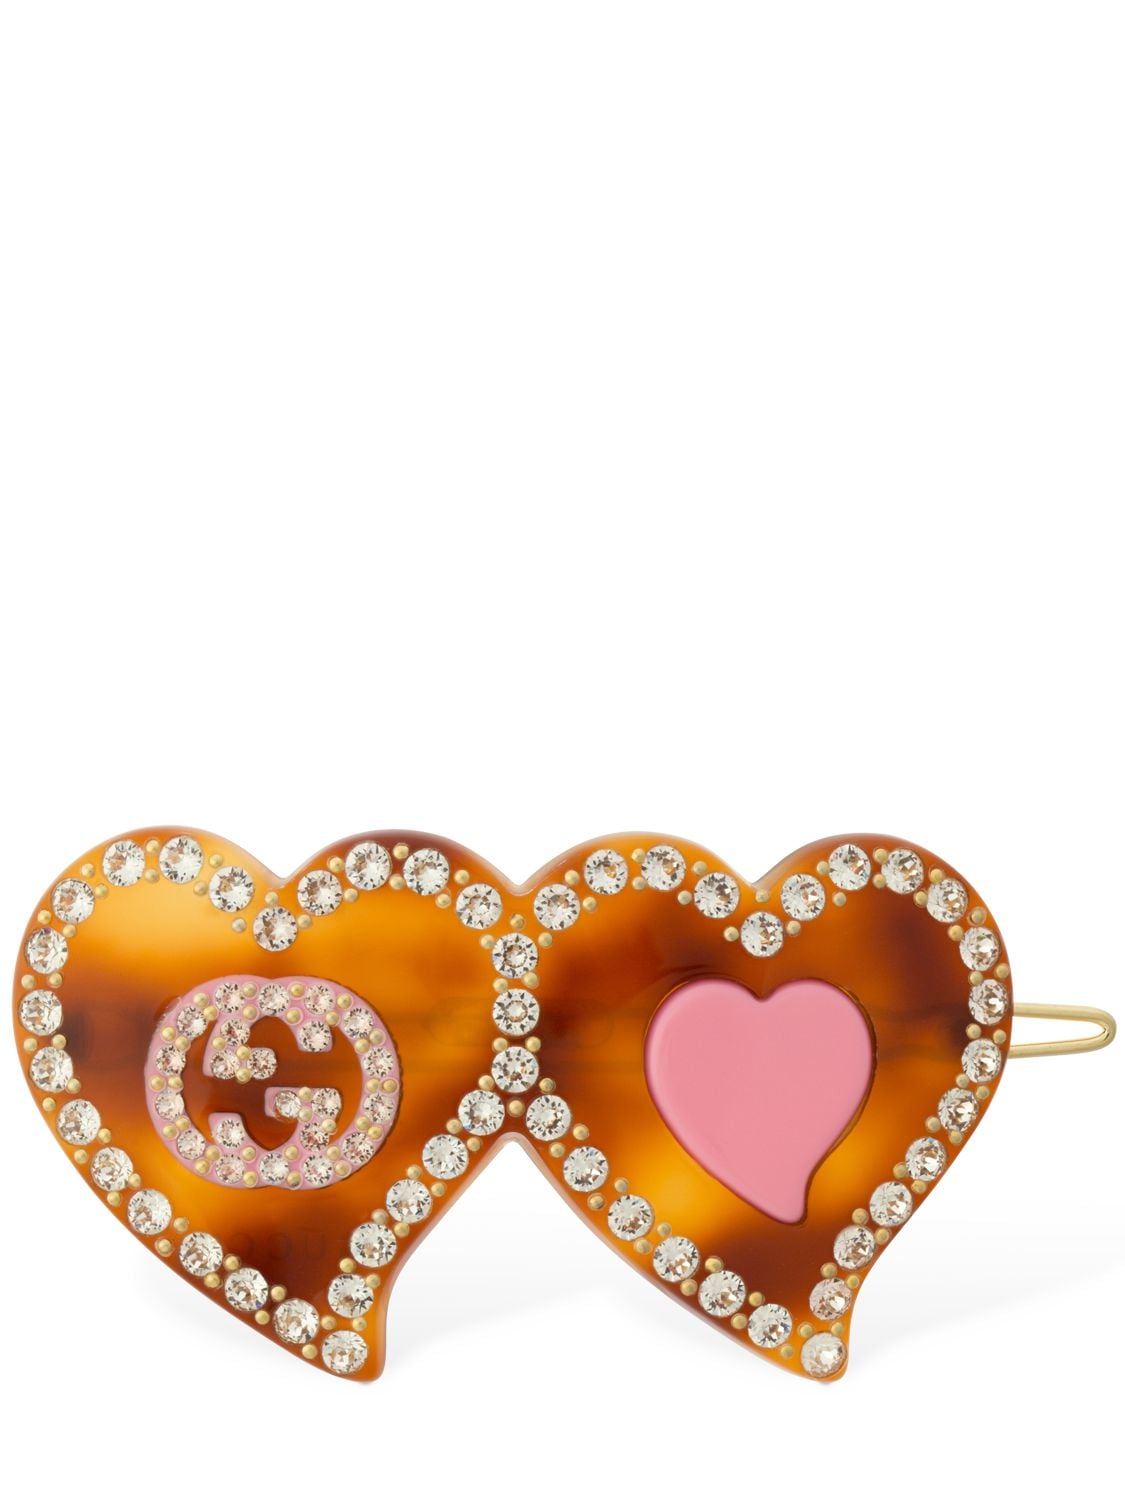 Image of Gg & Hearts Resin Hair Clip